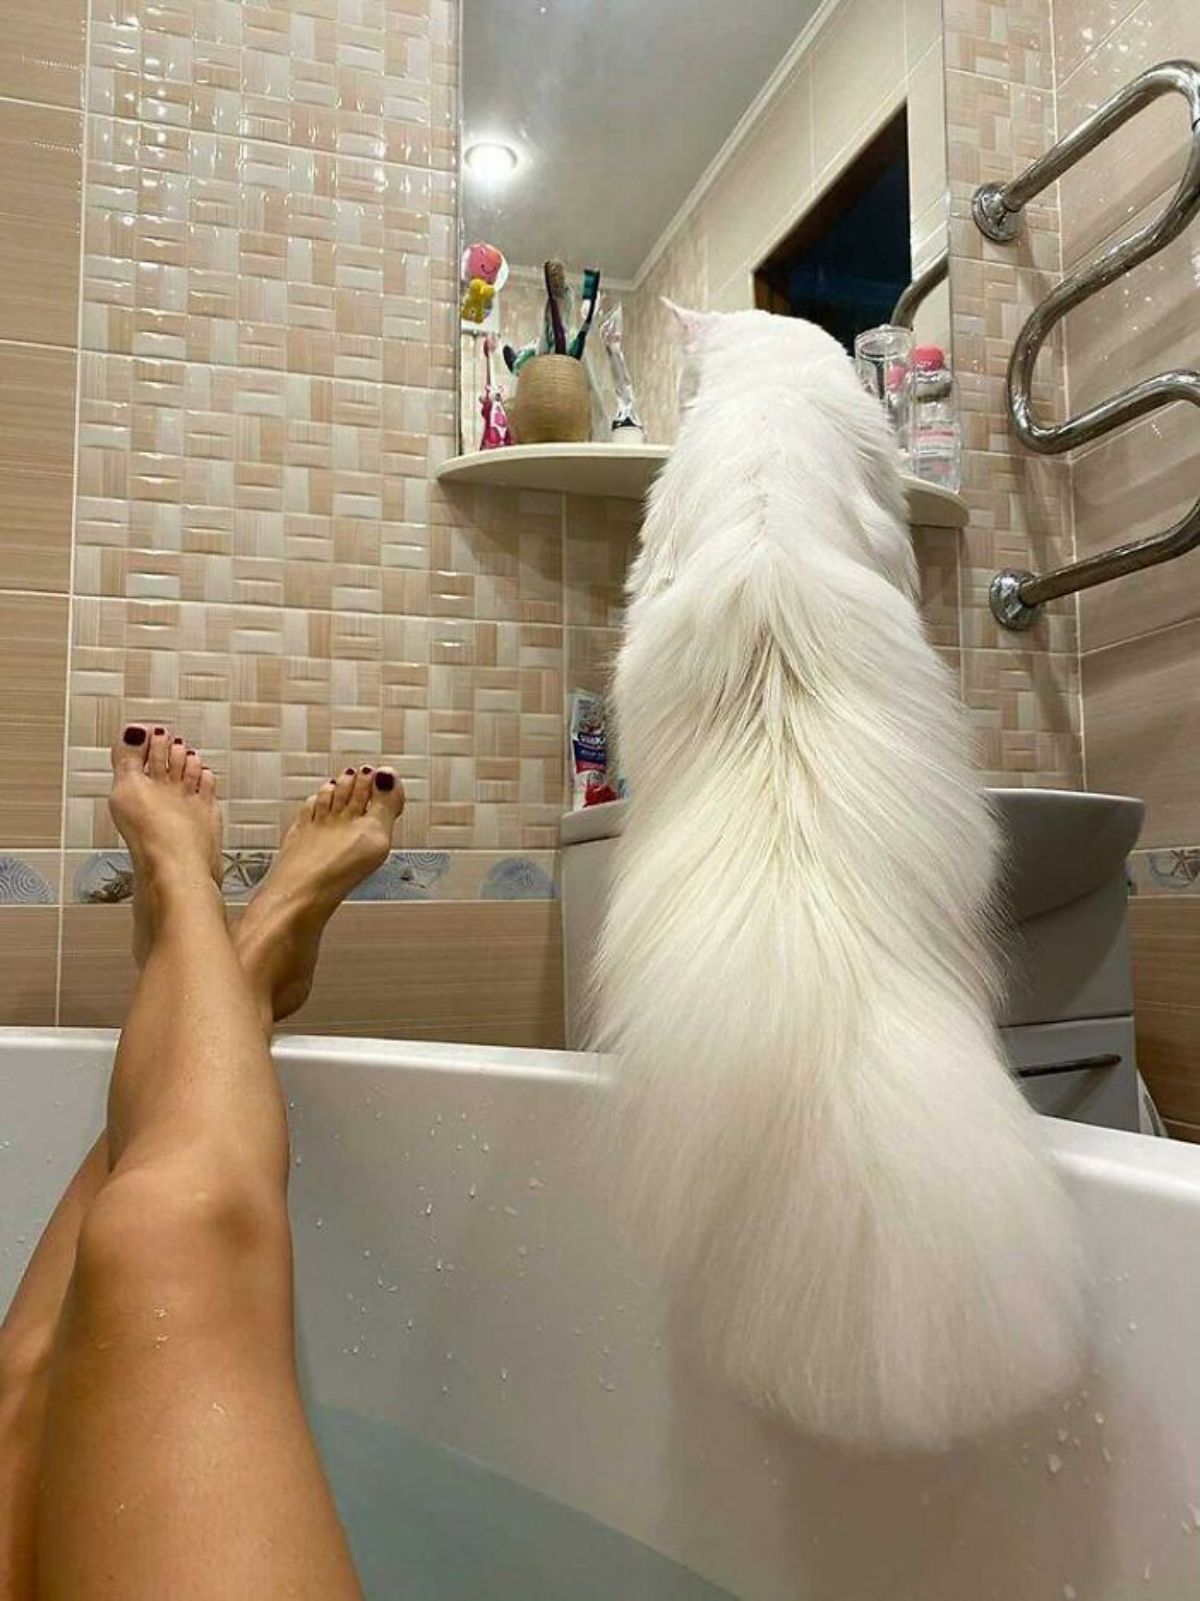 white maine coon cat in a bathroom looking into a mirror sitting on the rim of a washbasin with a woman in the bathtub behind it